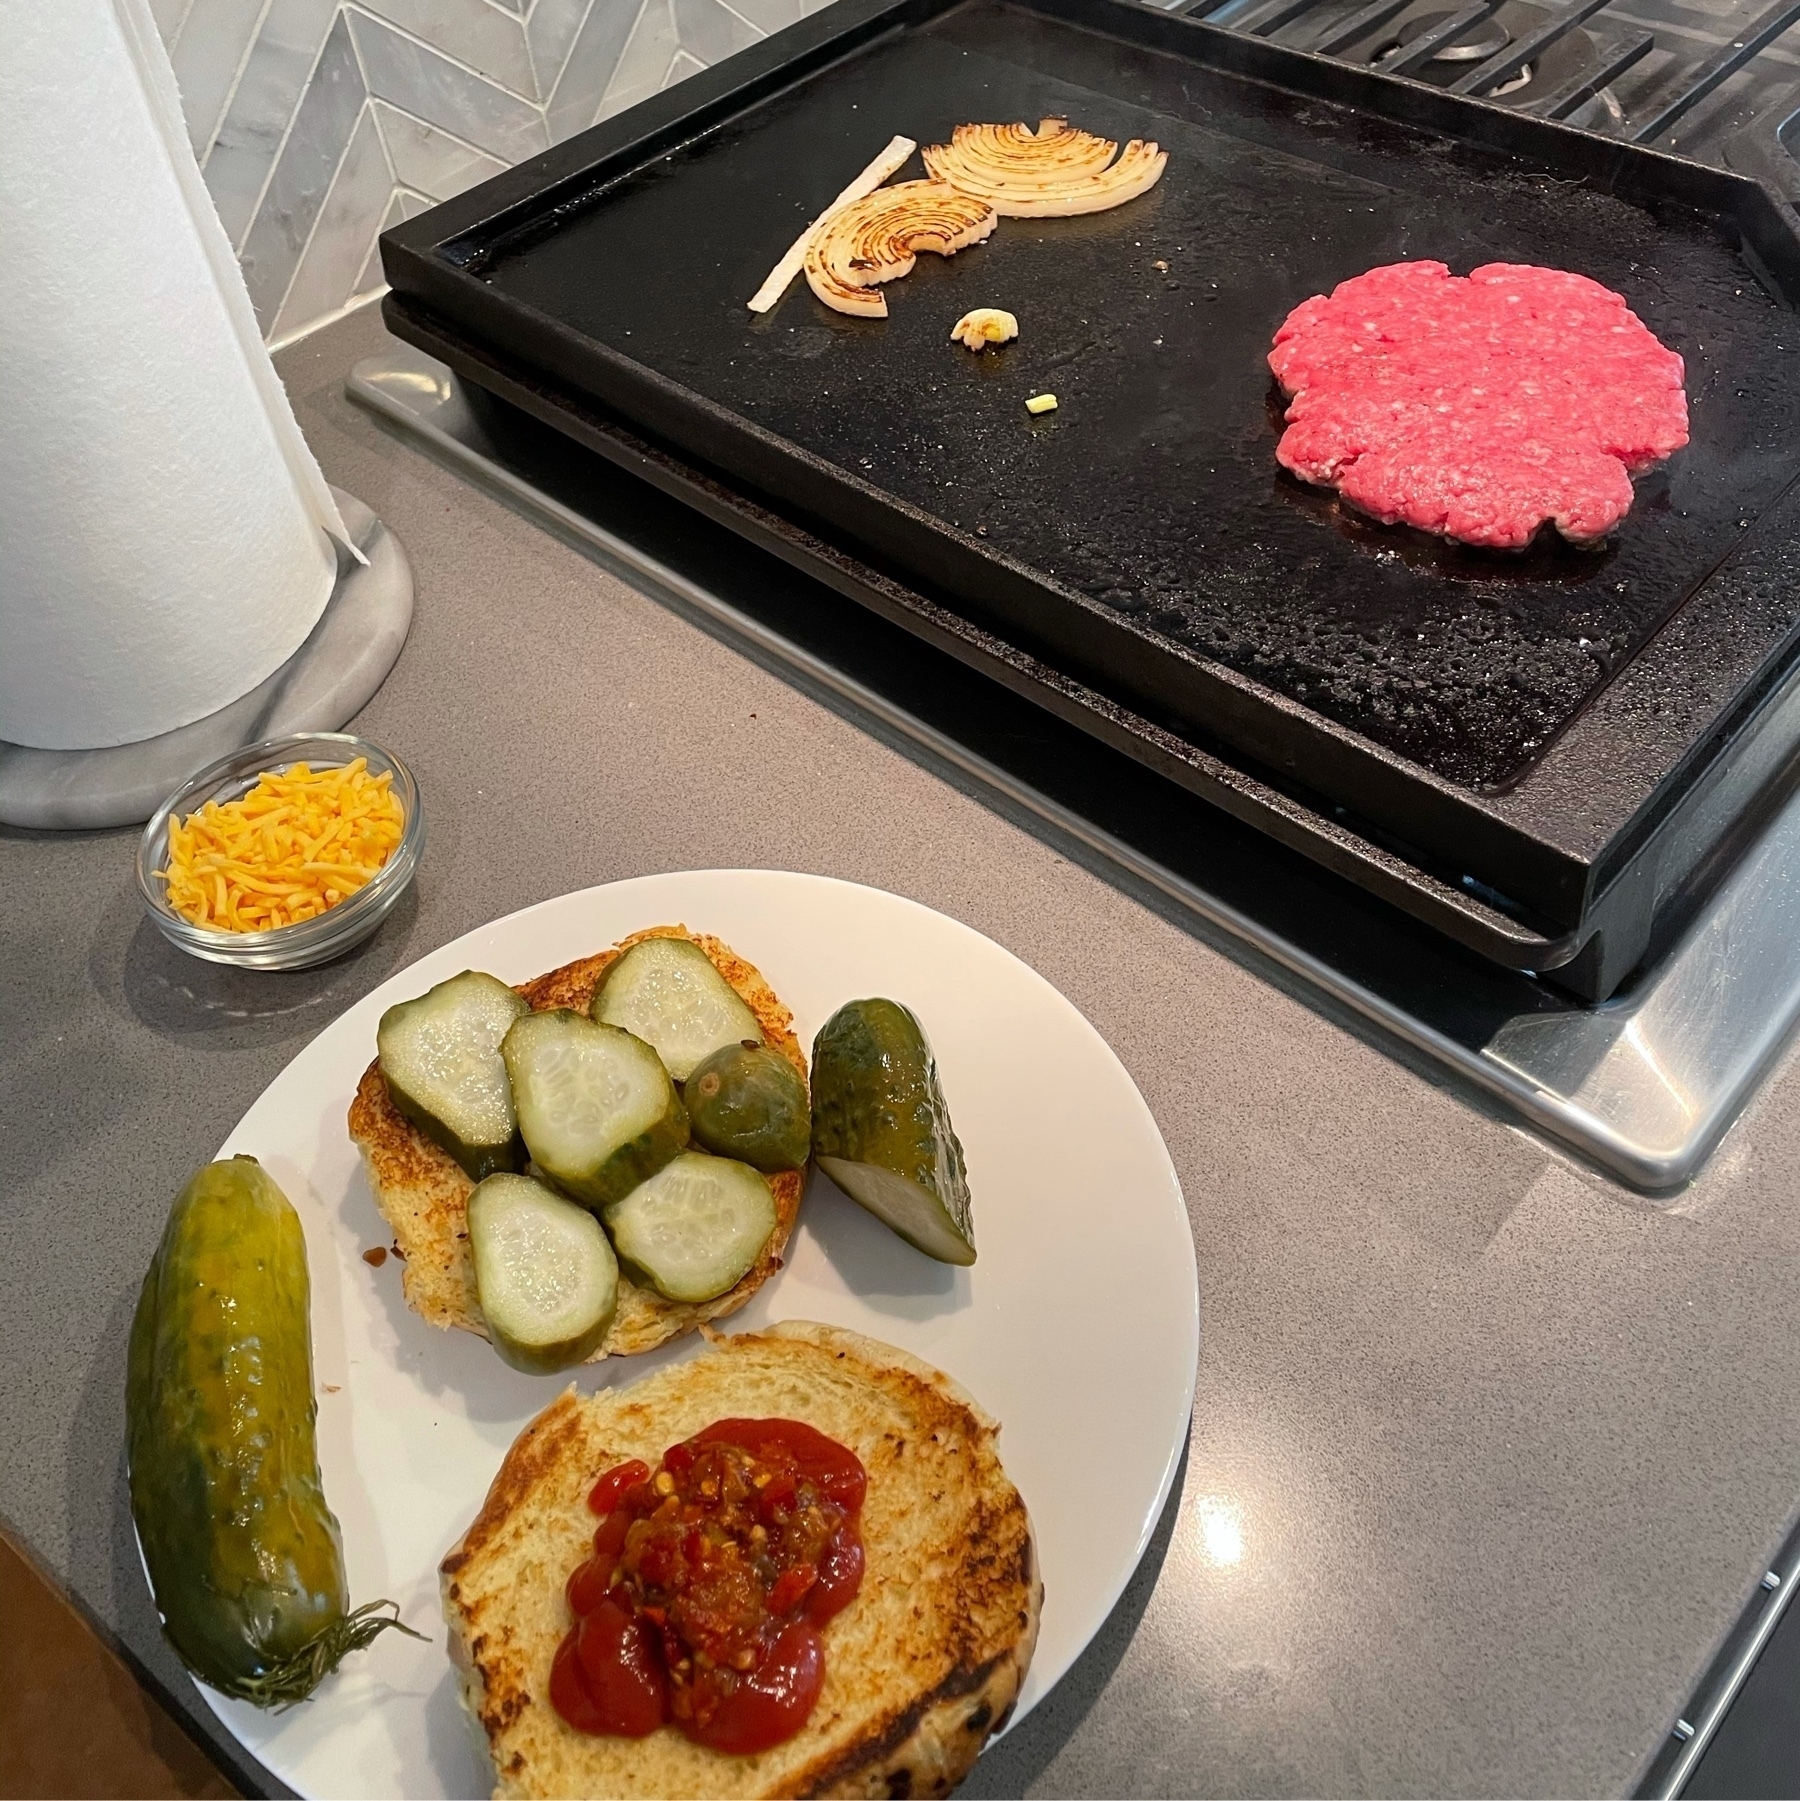 Burger on a flat top, with onions grilling, and a bun already assembled with pickles and ketchup.